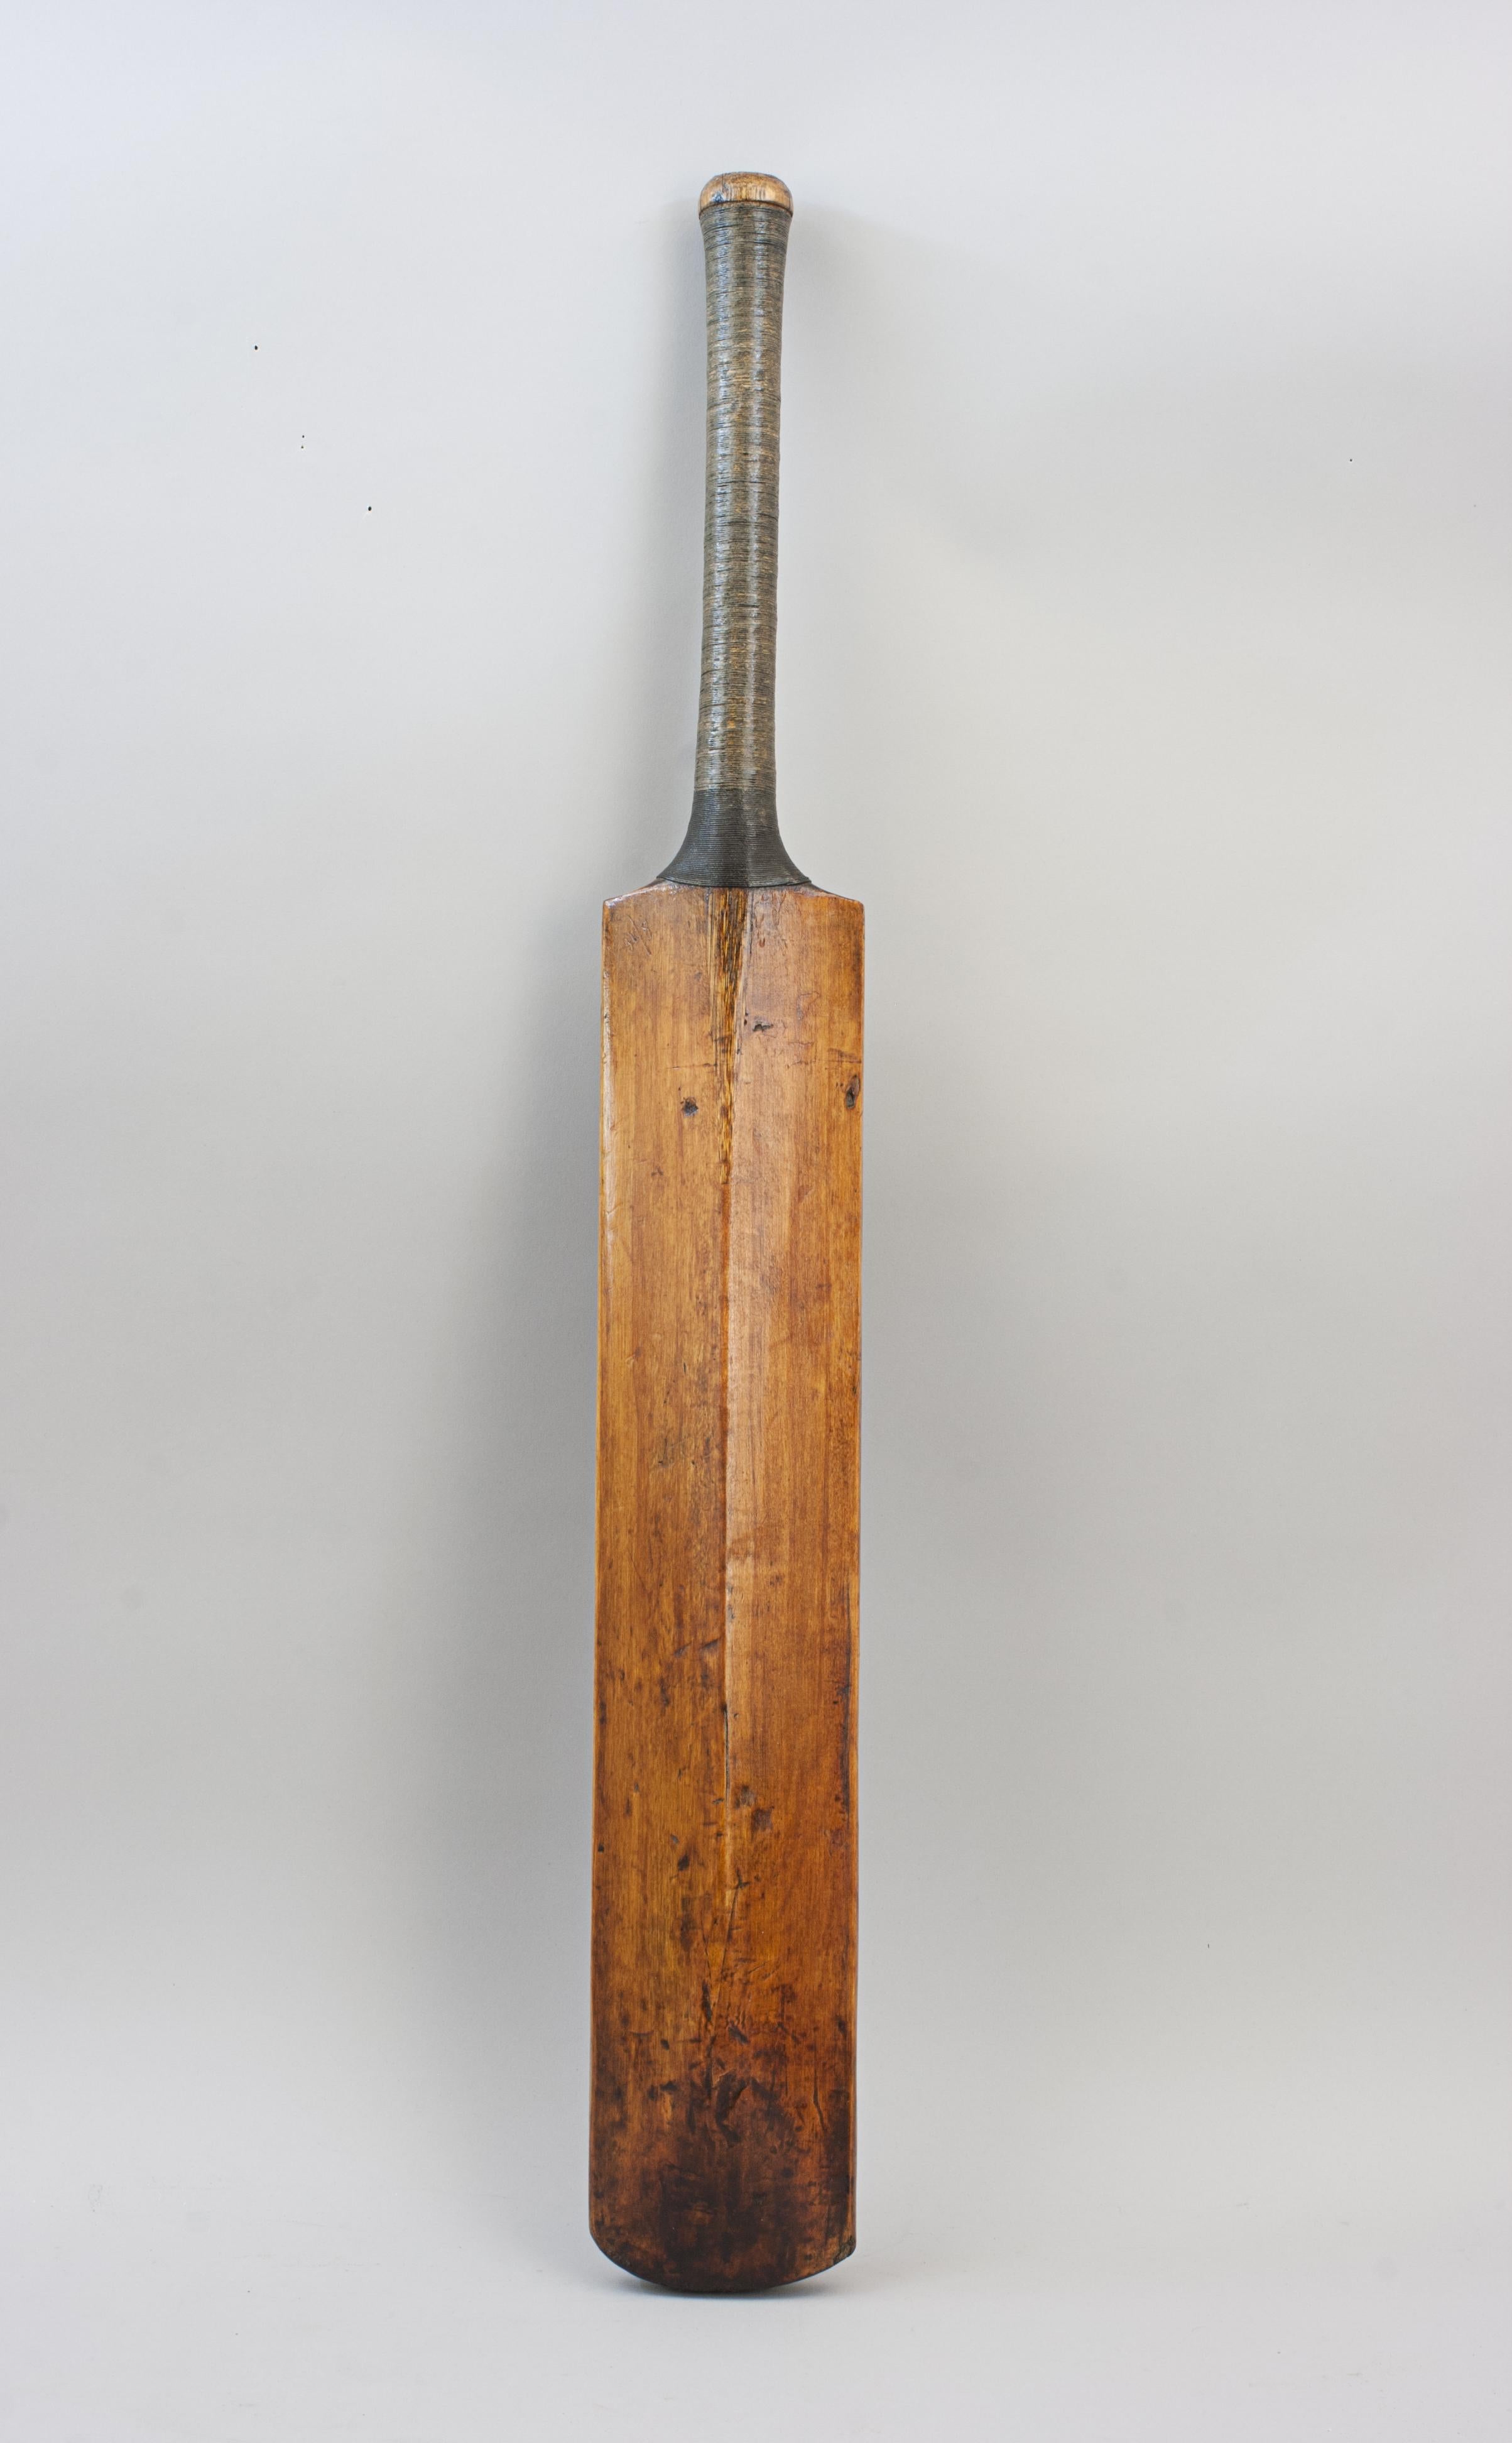 Junior Sykes 'Don Bradman' Autograph Cricket Bat.
A fine Sykes 'Don Bradman' endorsed cricket bat. The willow blade is clean and in good condition with a cord strung grip and triple sprung handle. The shoulders are embossed 'Syked Ltd., Horbury,